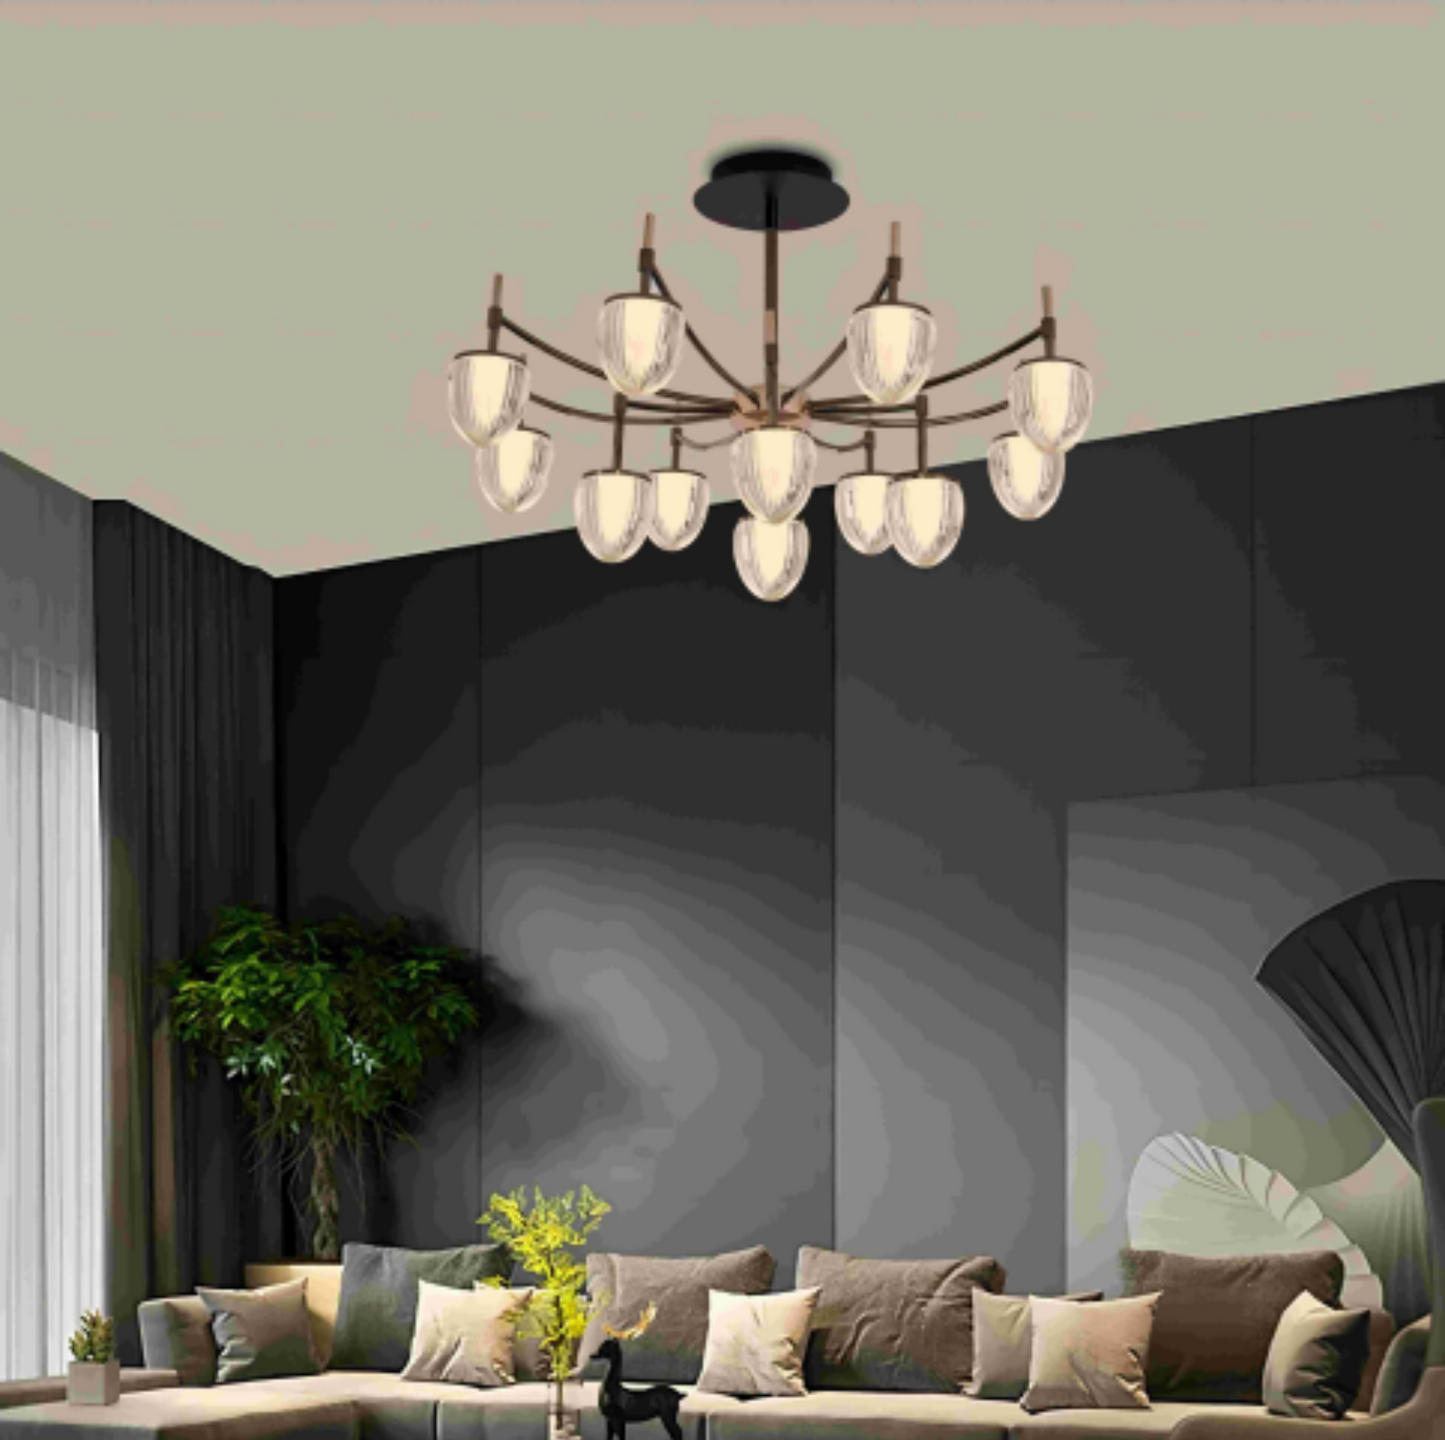 Load image into Gallery viewer, Metal Acrylic Chandelier by Gloss (P0737-12A)
